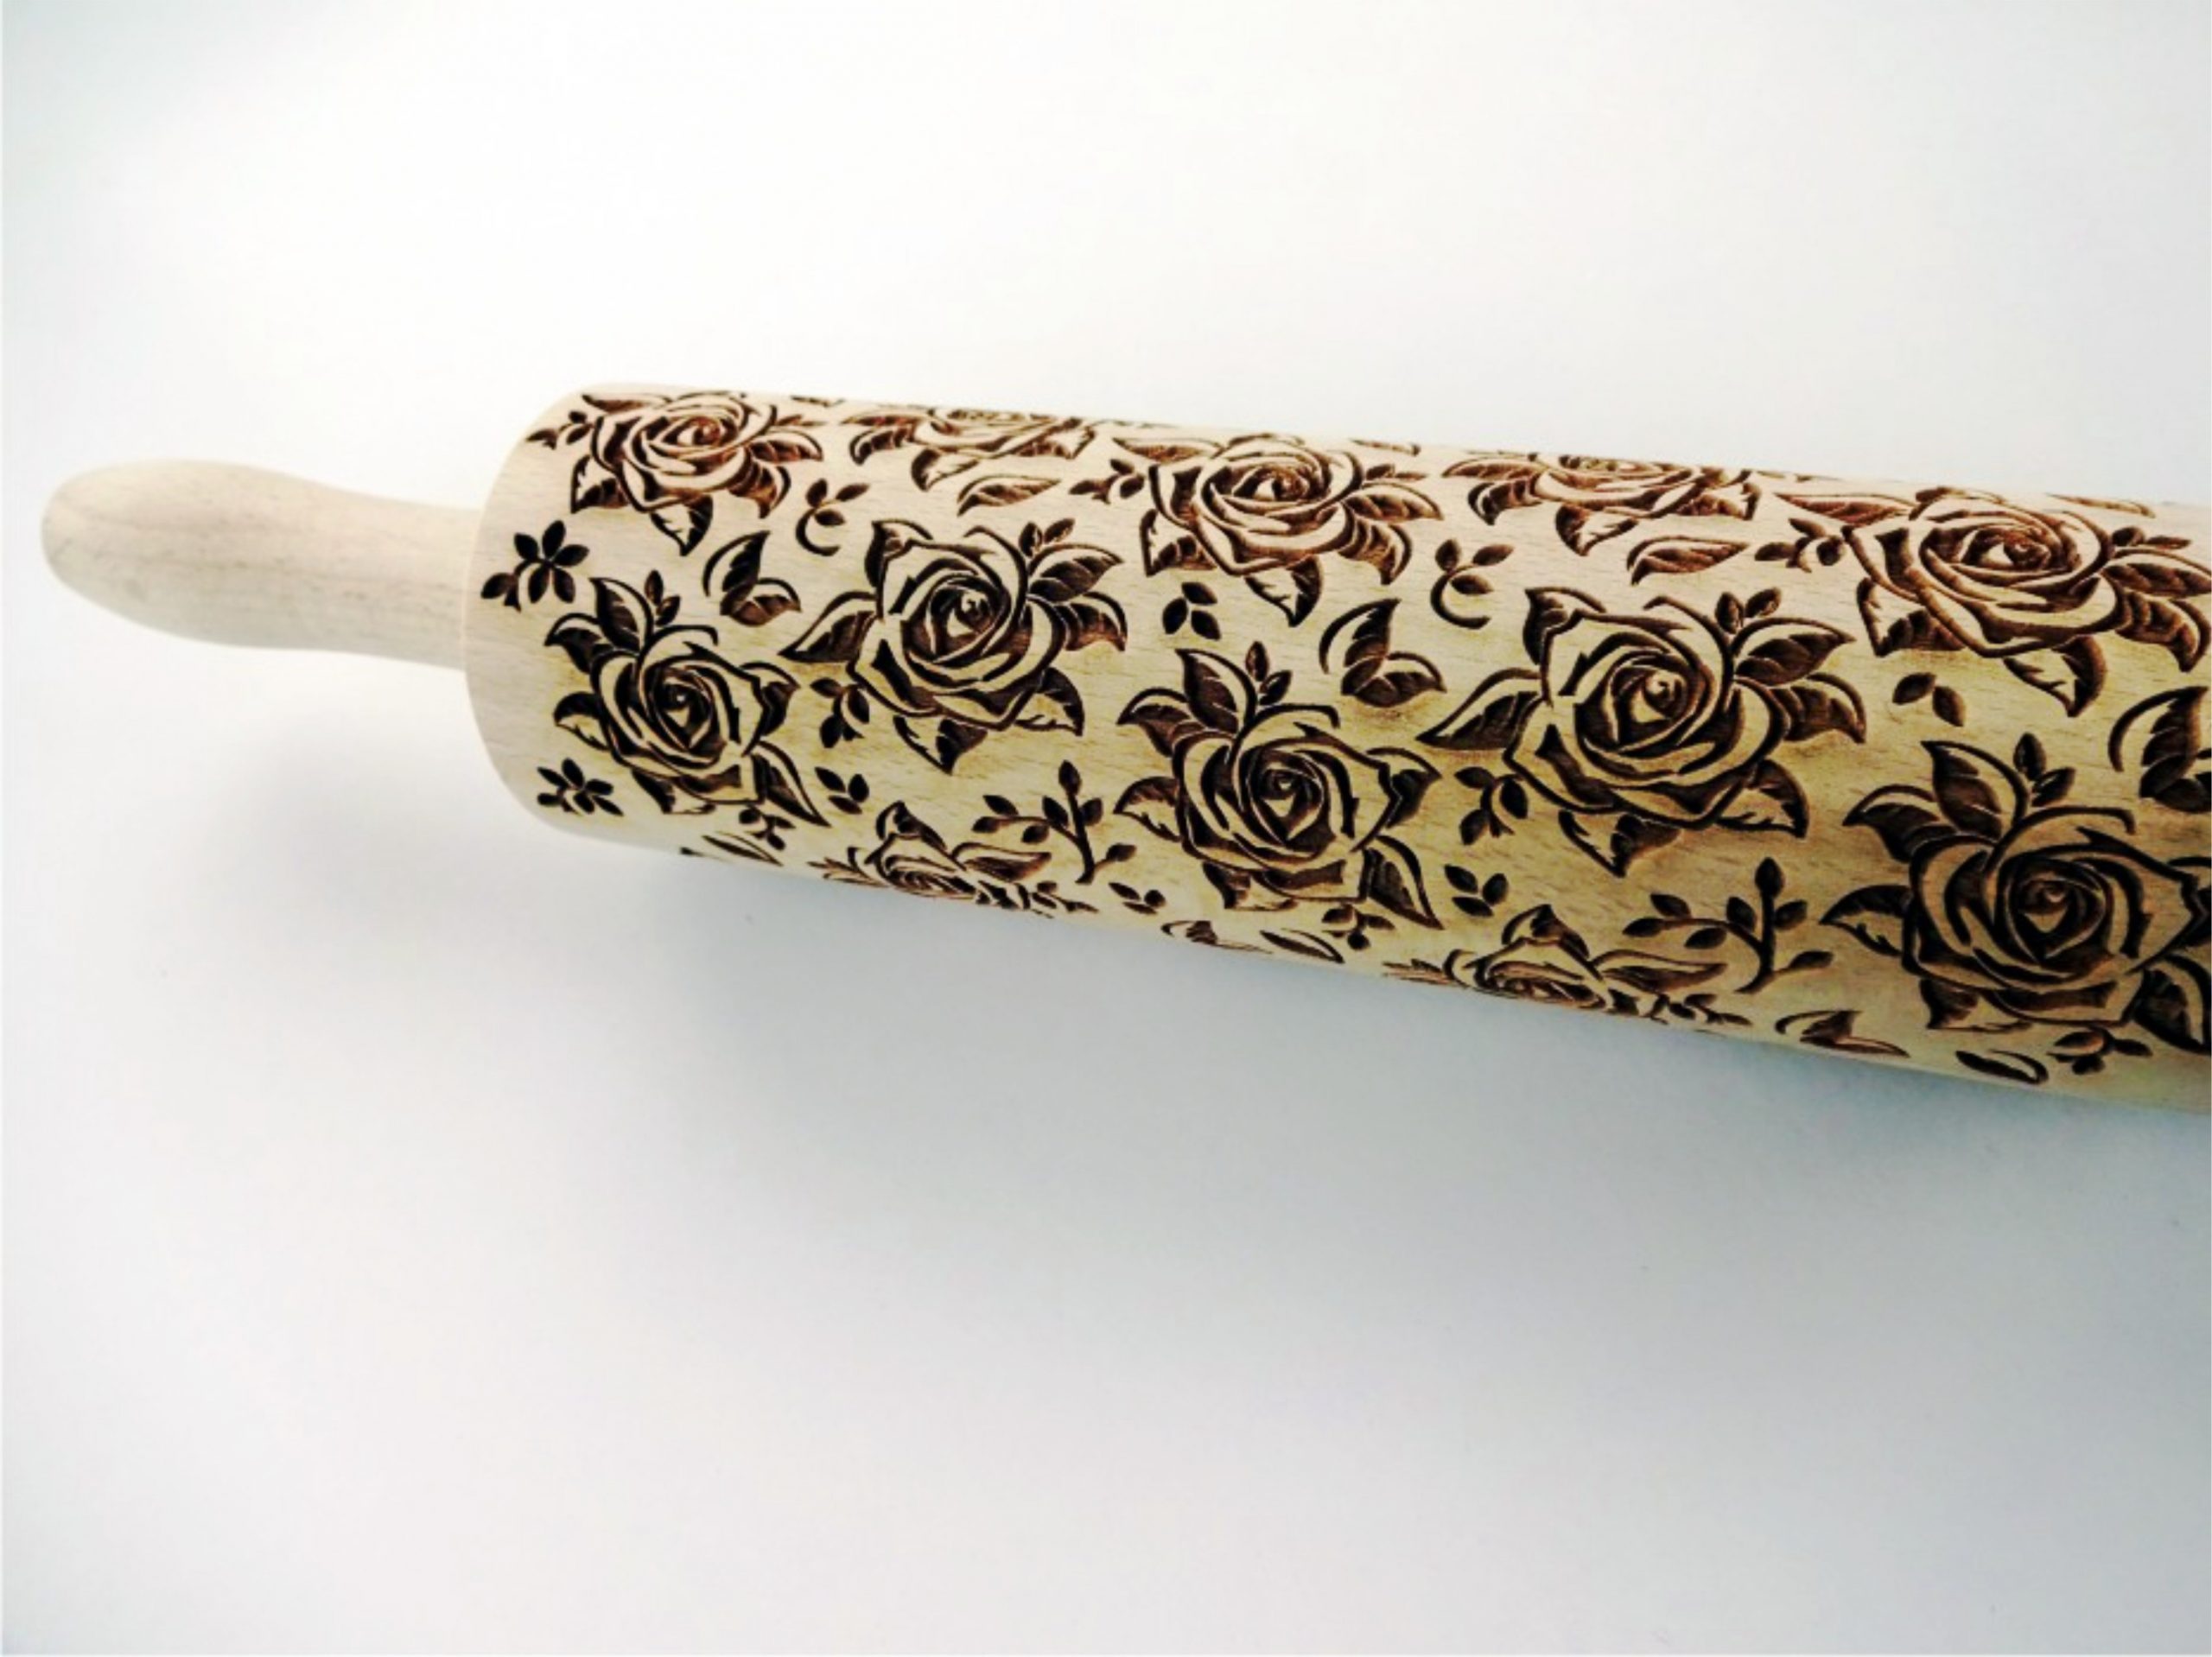 Gift for mother BLOSSOMS WALTZ pattern Embossing Rolling pin Roses pattern. Laser cut rolling pin with Blossoms WALTZ pattern Birthday